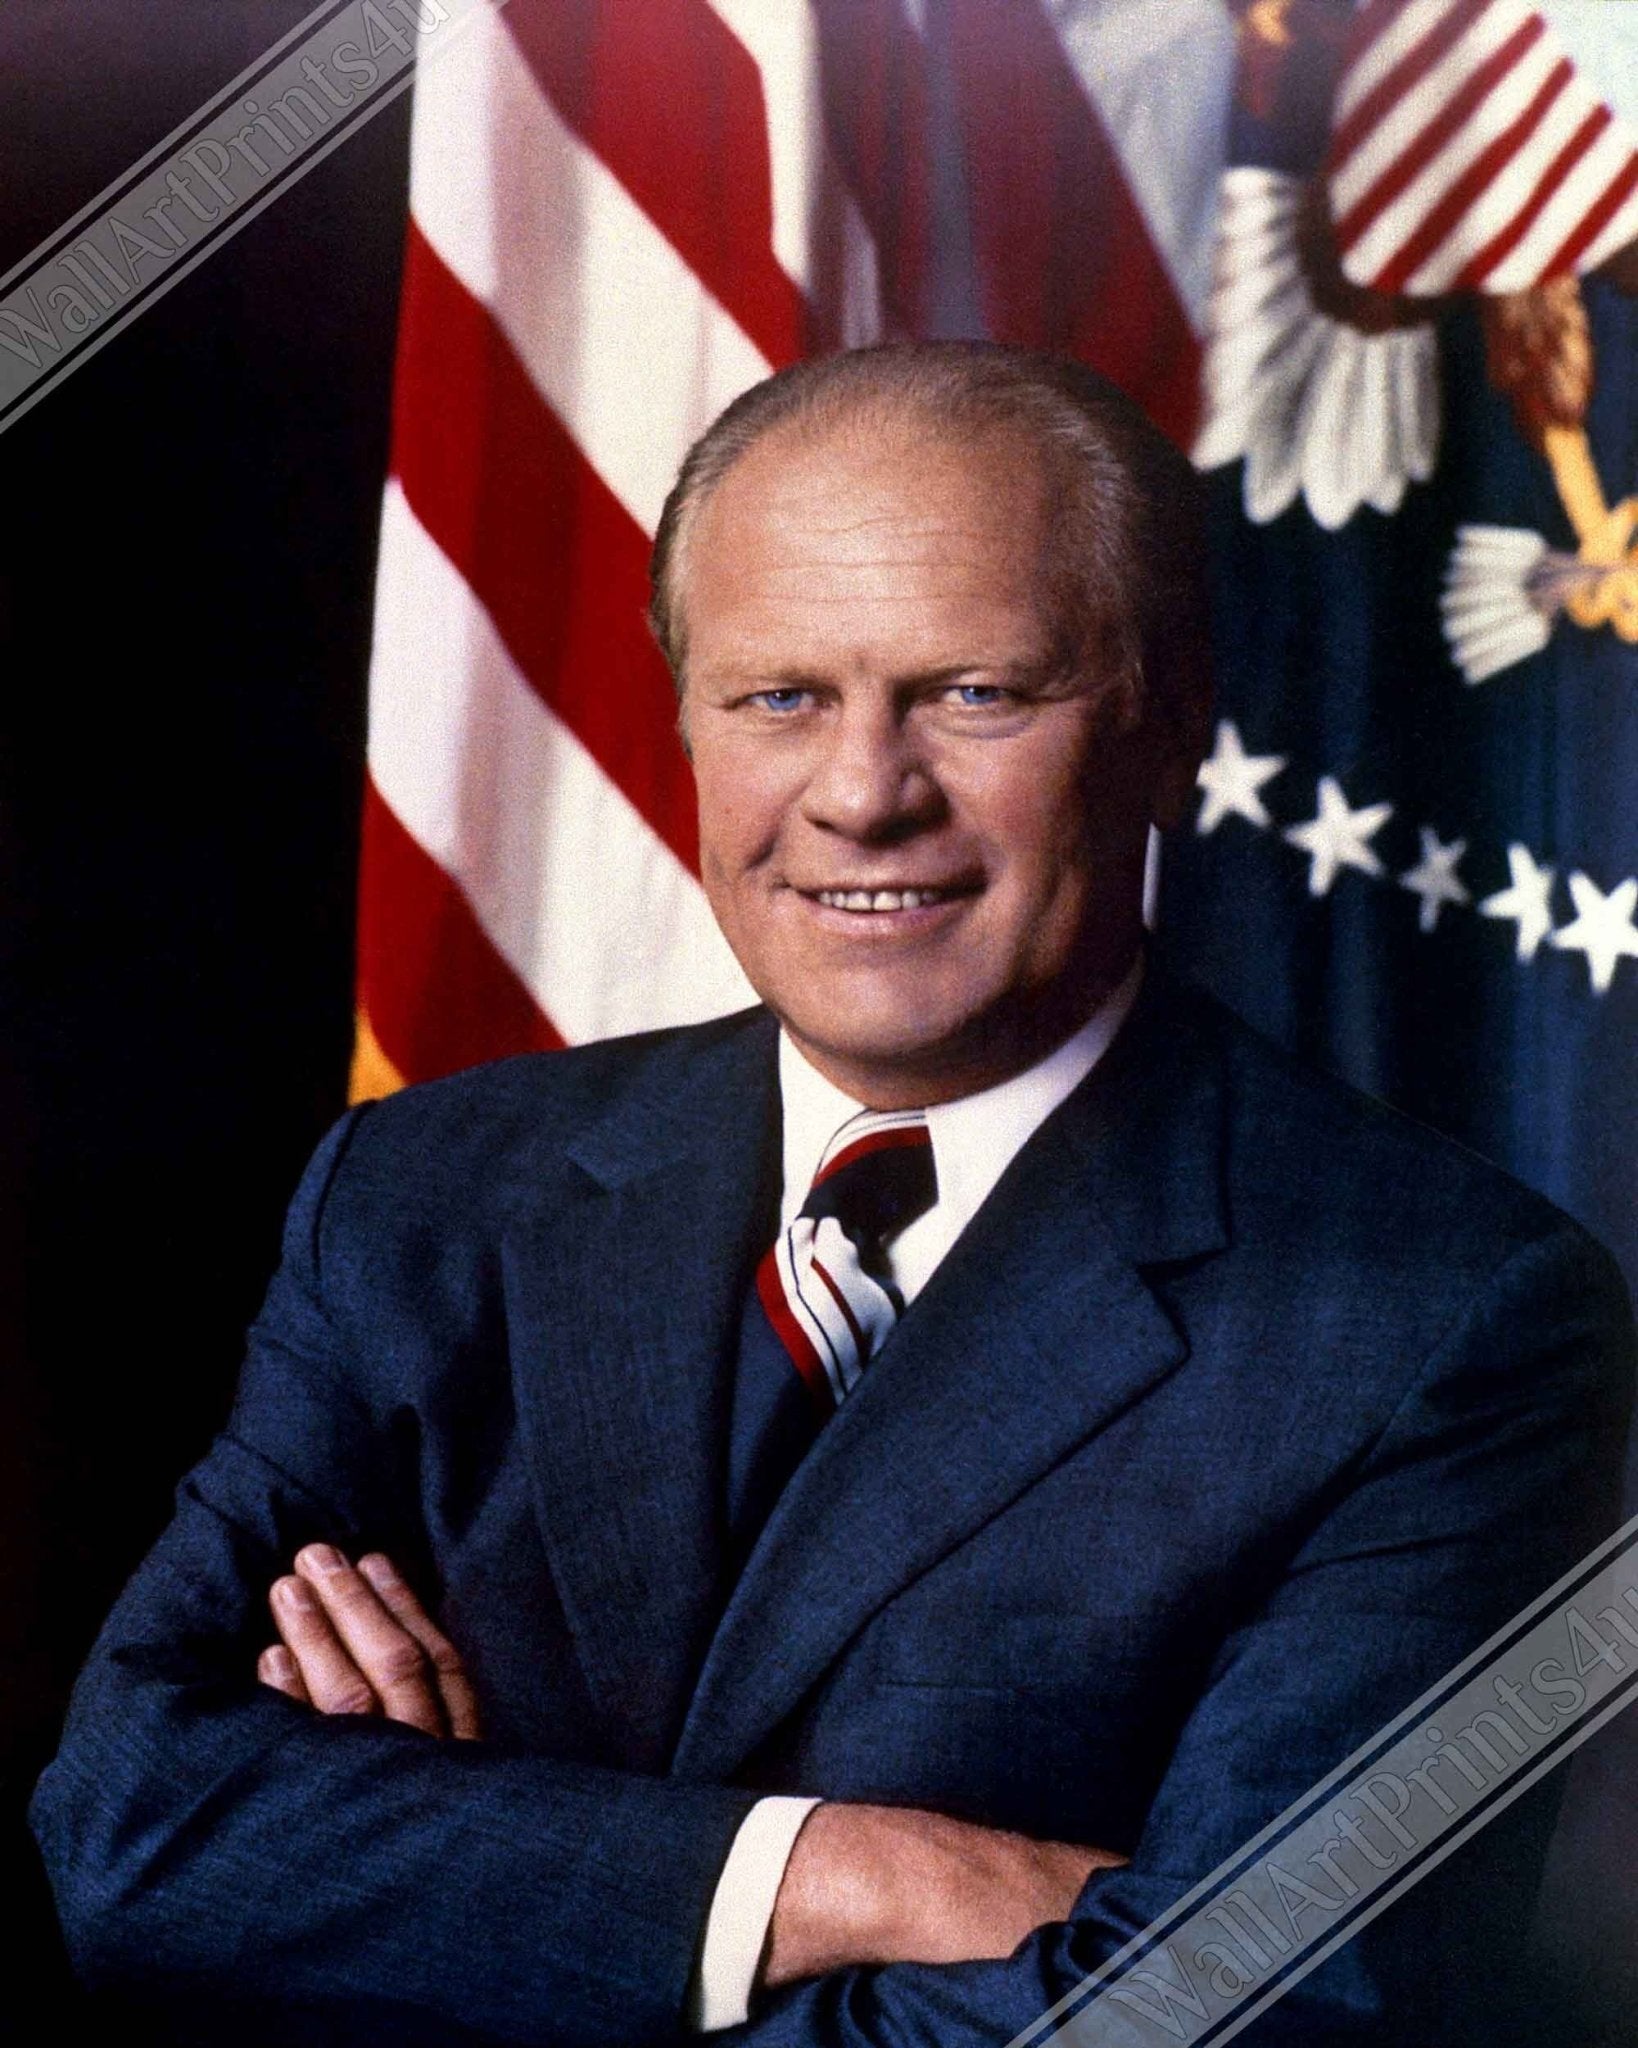 Gerald Ford Poster, 38th President Of These United States, Vintage Photo Portrait - Gerald Ford Print - WallArtPrints4U